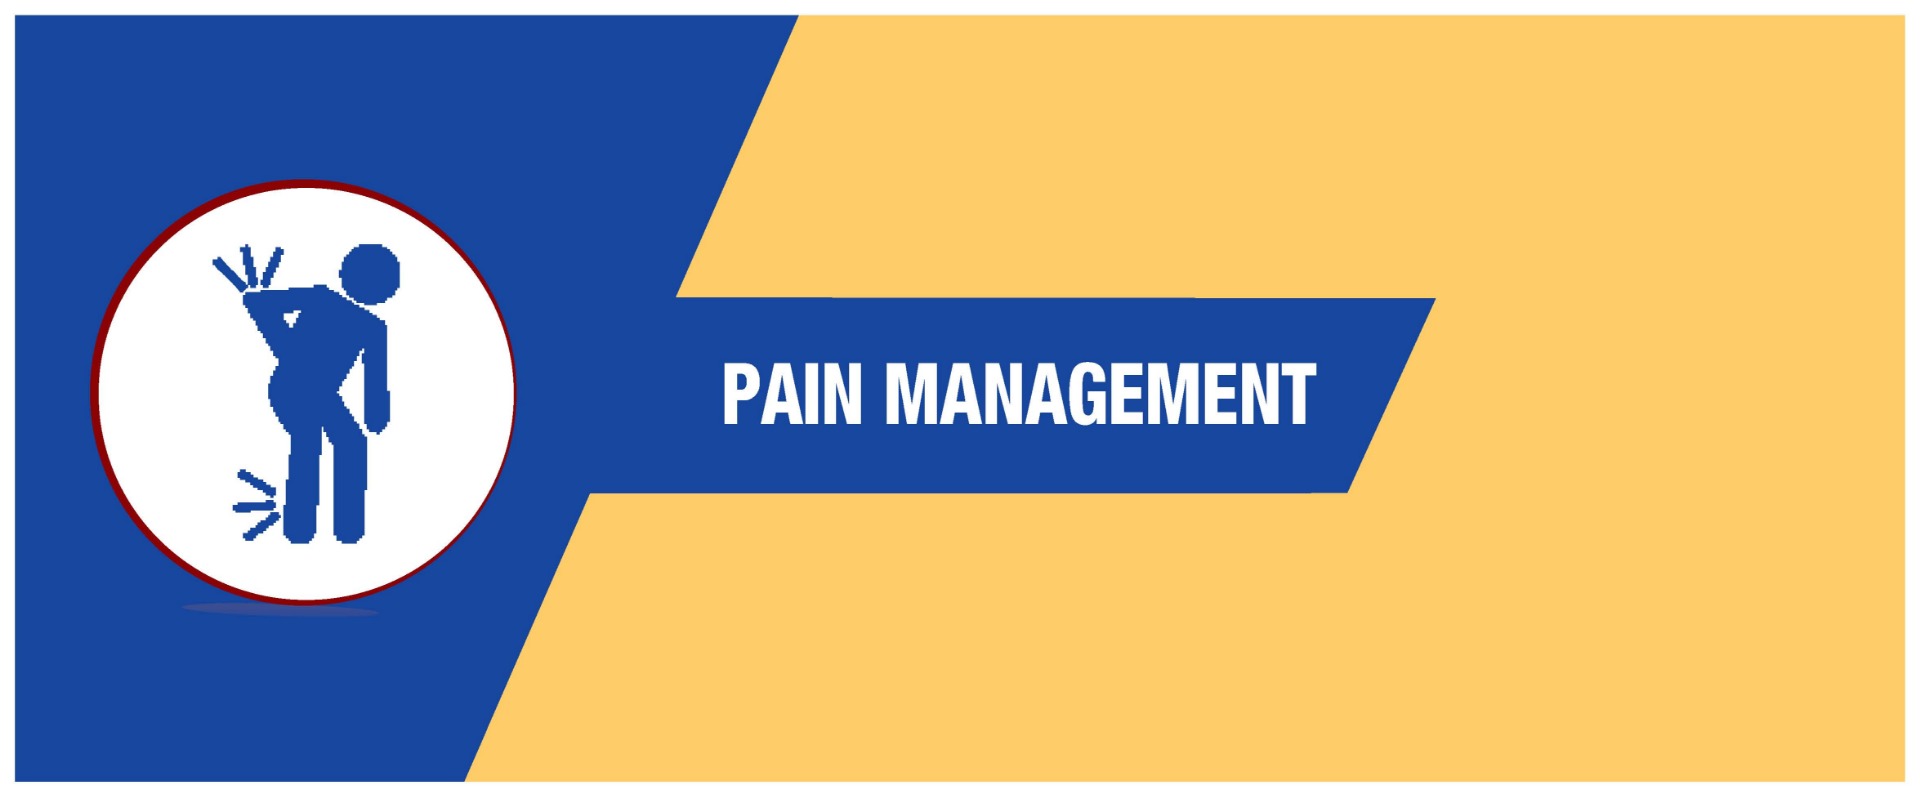 ANAESTHESIA & PAIN MANAGEMENT